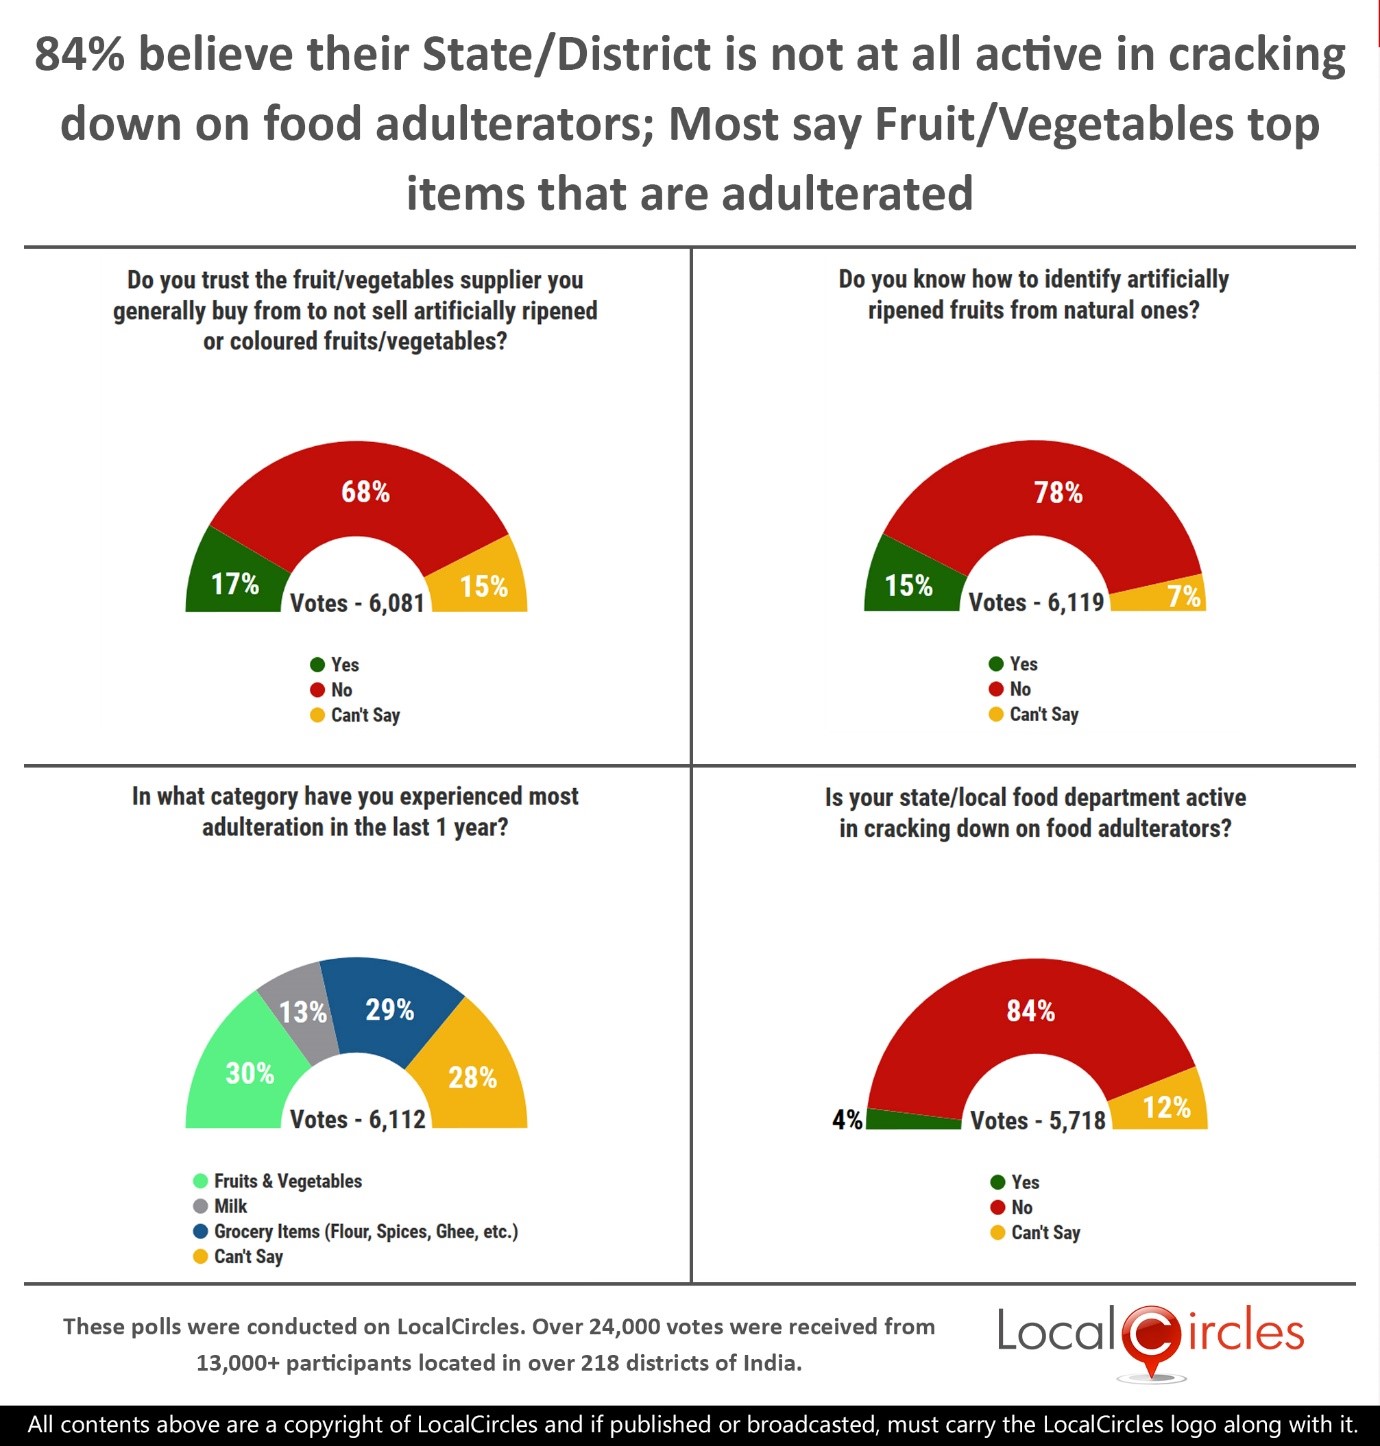 LocalCircles Poll - 84% believe their State/District is not at all active in cracking down on food adulterators ; Most say Fruit/Vegetables top items that are adulterated